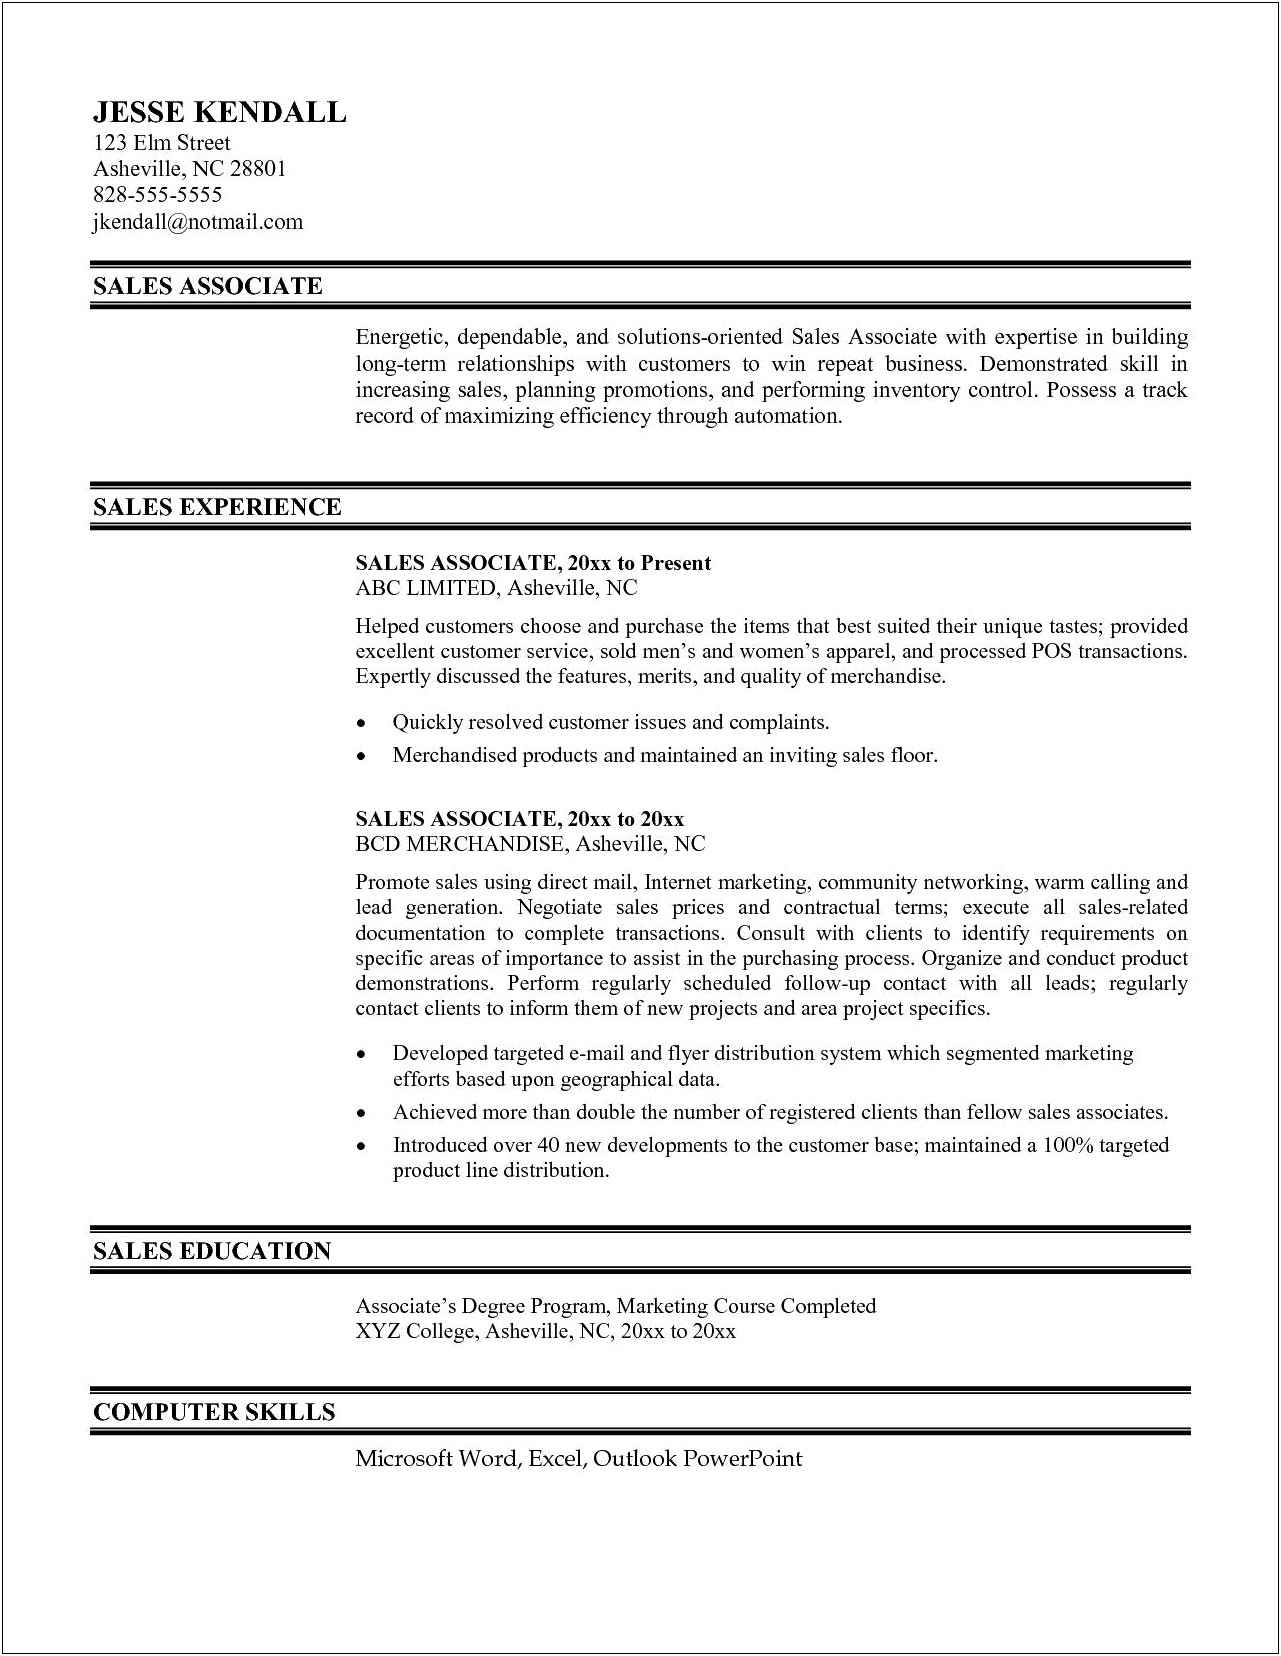 Fire And Life Safety Director Resume Objective